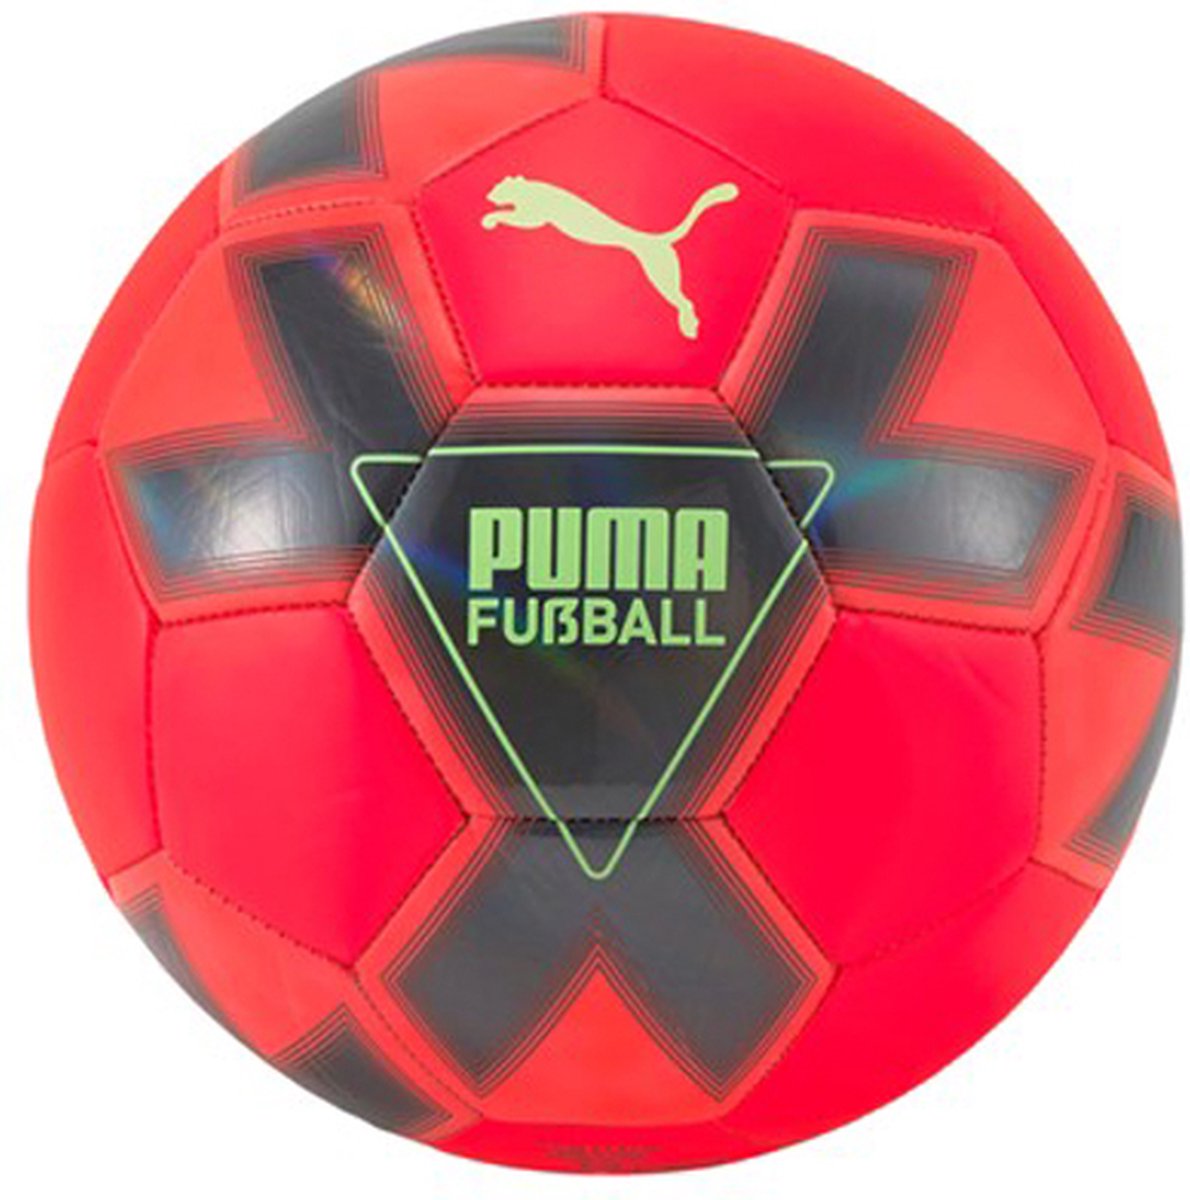 Puma voetbal Cage - maat 3 - neon rood